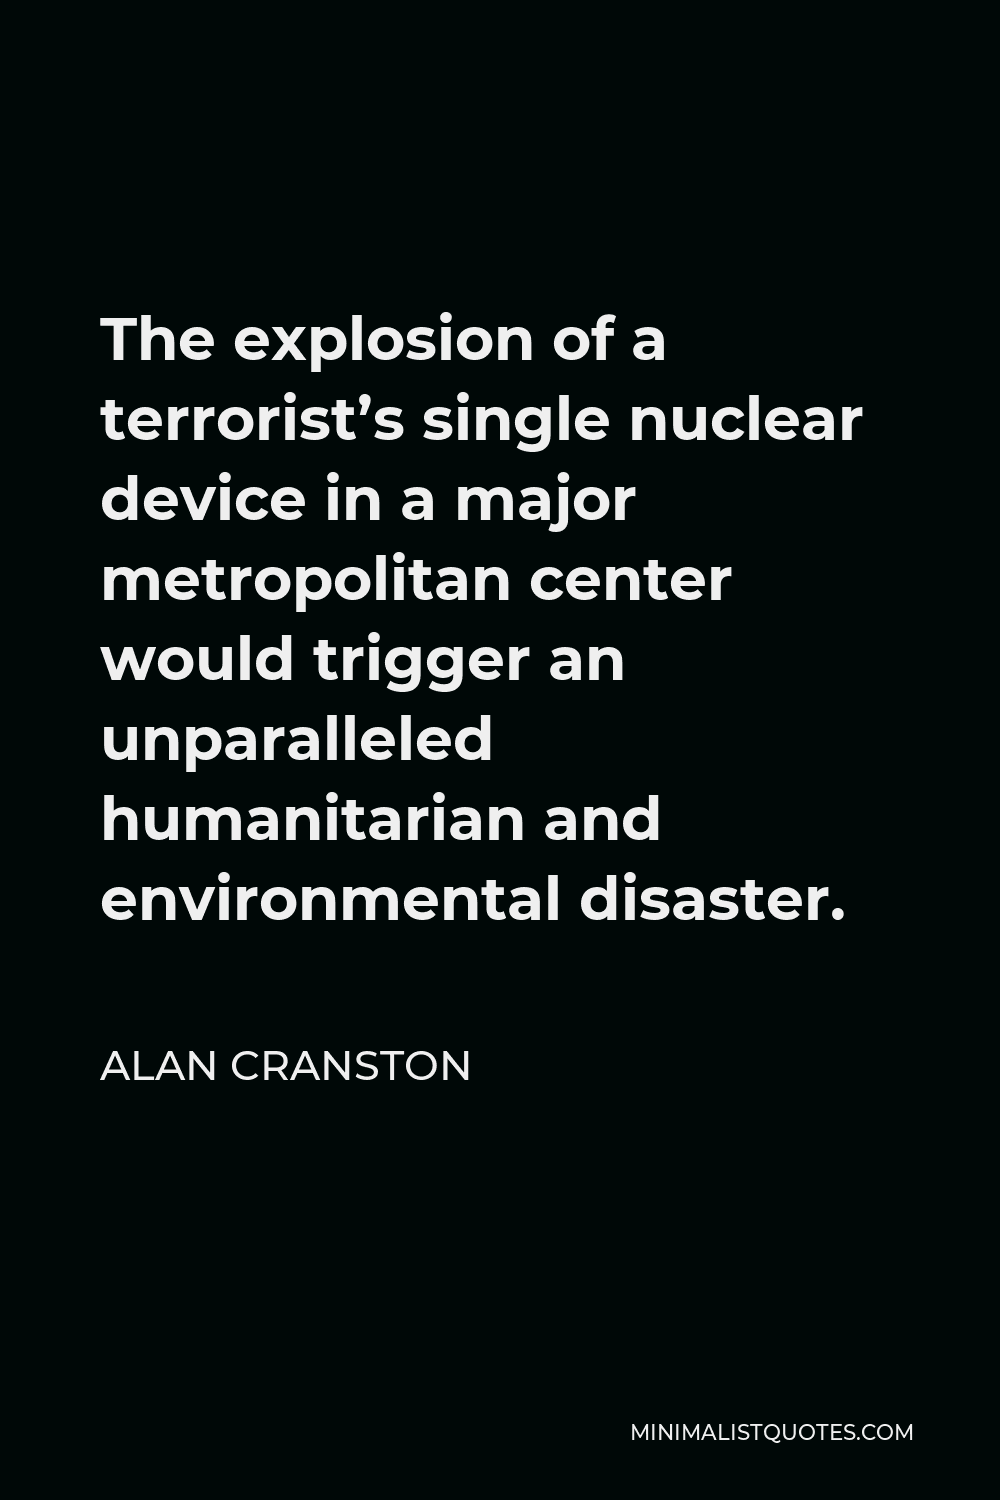 Alan Cranston Quote - The explosion of a terrorist’s single nuclear device in a major metropolitan center would trigger an unparalleled humanitarian and environmental disaster.